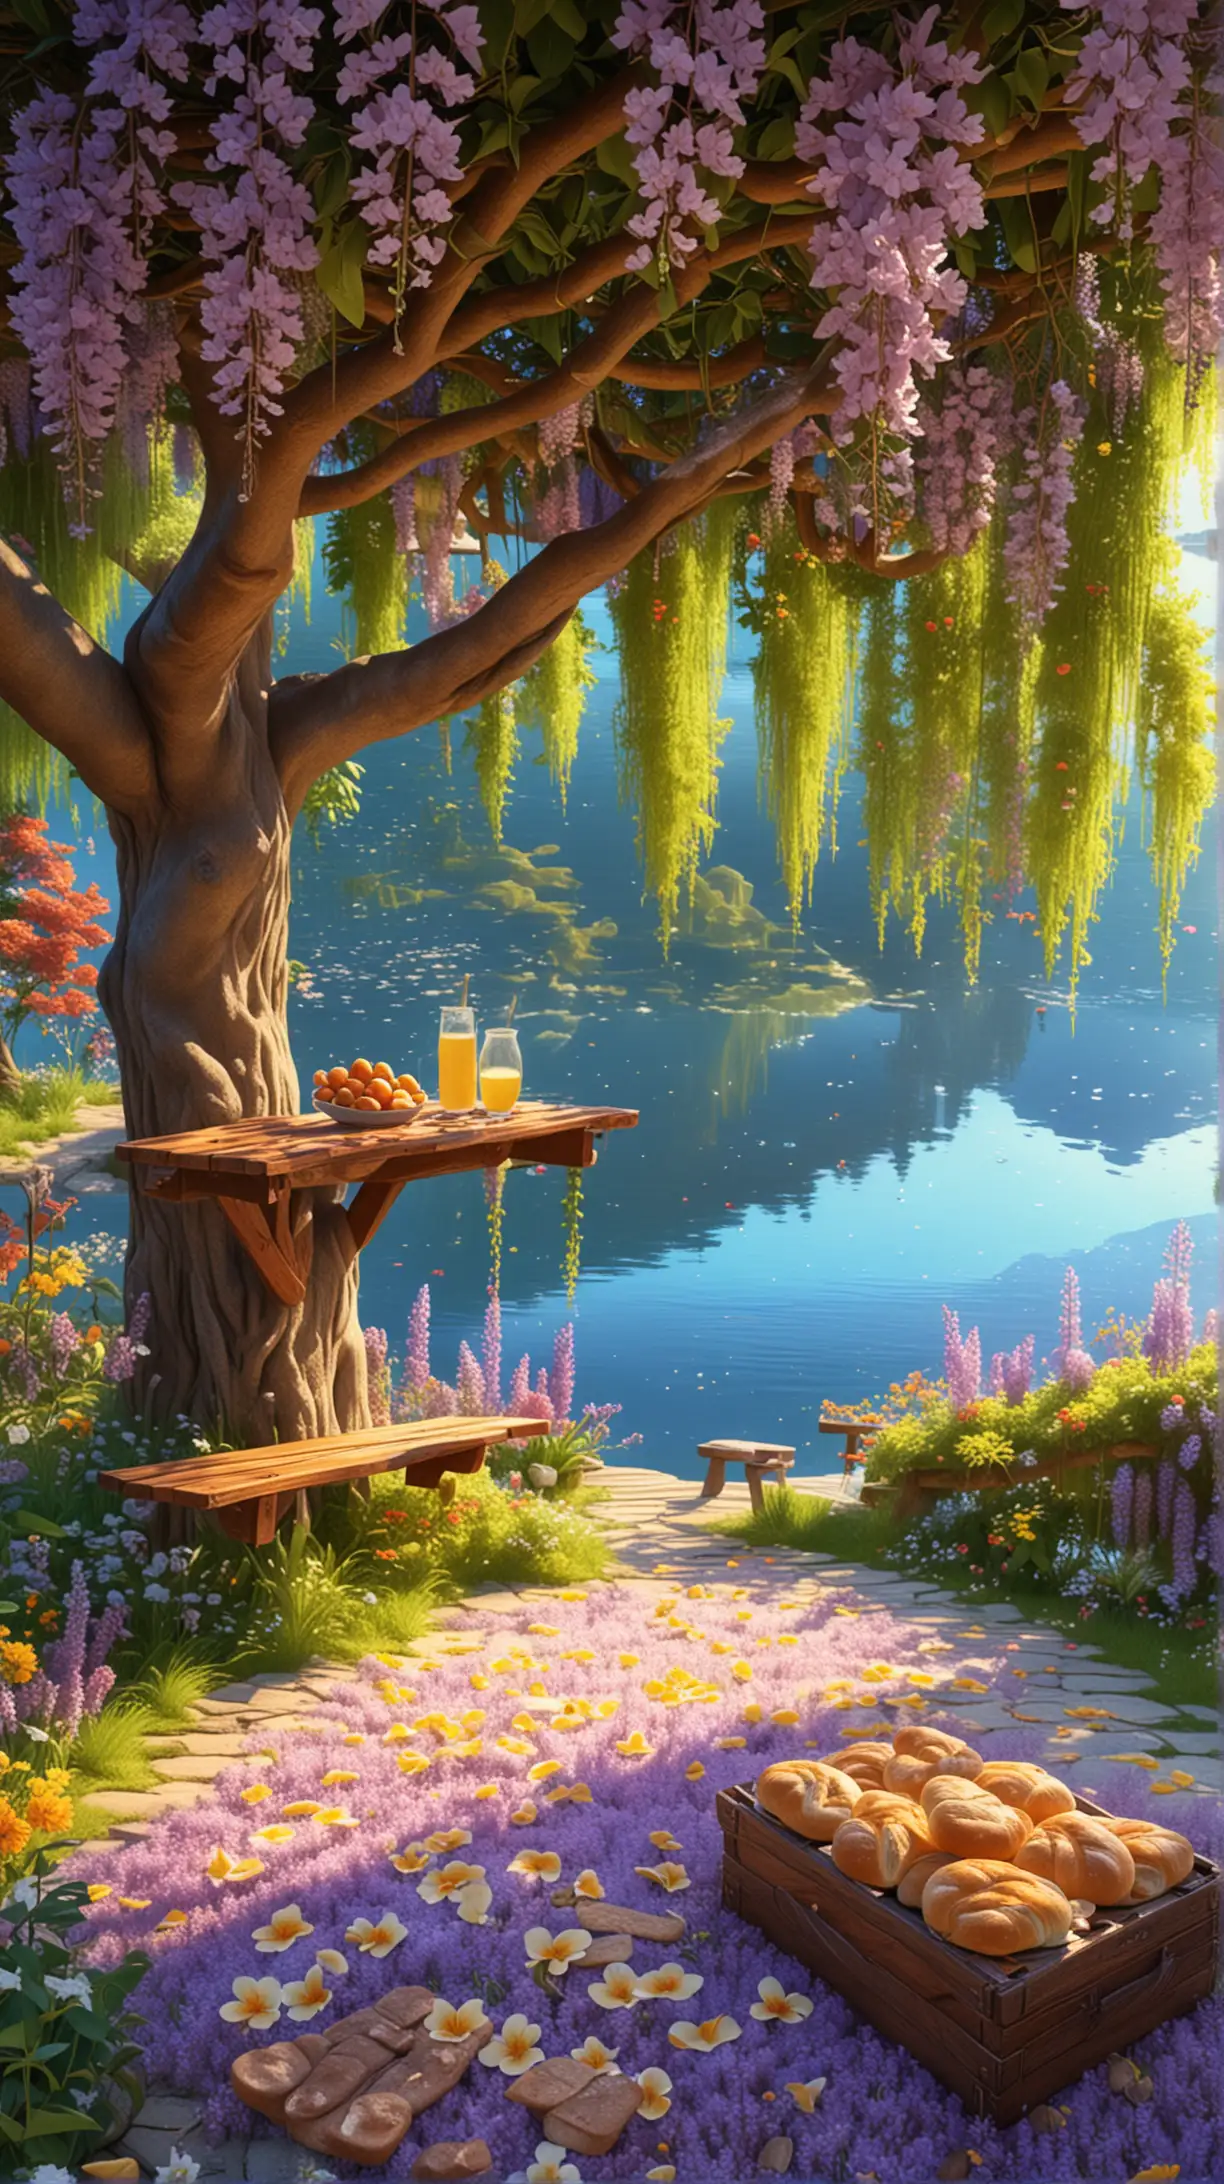 Ghibli garden dreams, wood bench under a big tree, picnic carpet with  breads basket and lemonade,  variant vibrant flowers , mesmerizing view to the shining lake,  wisteria vines and lily piers, petals on the sky, ultra detailed, 3D render, acrylic palette knife, mystics_meta style